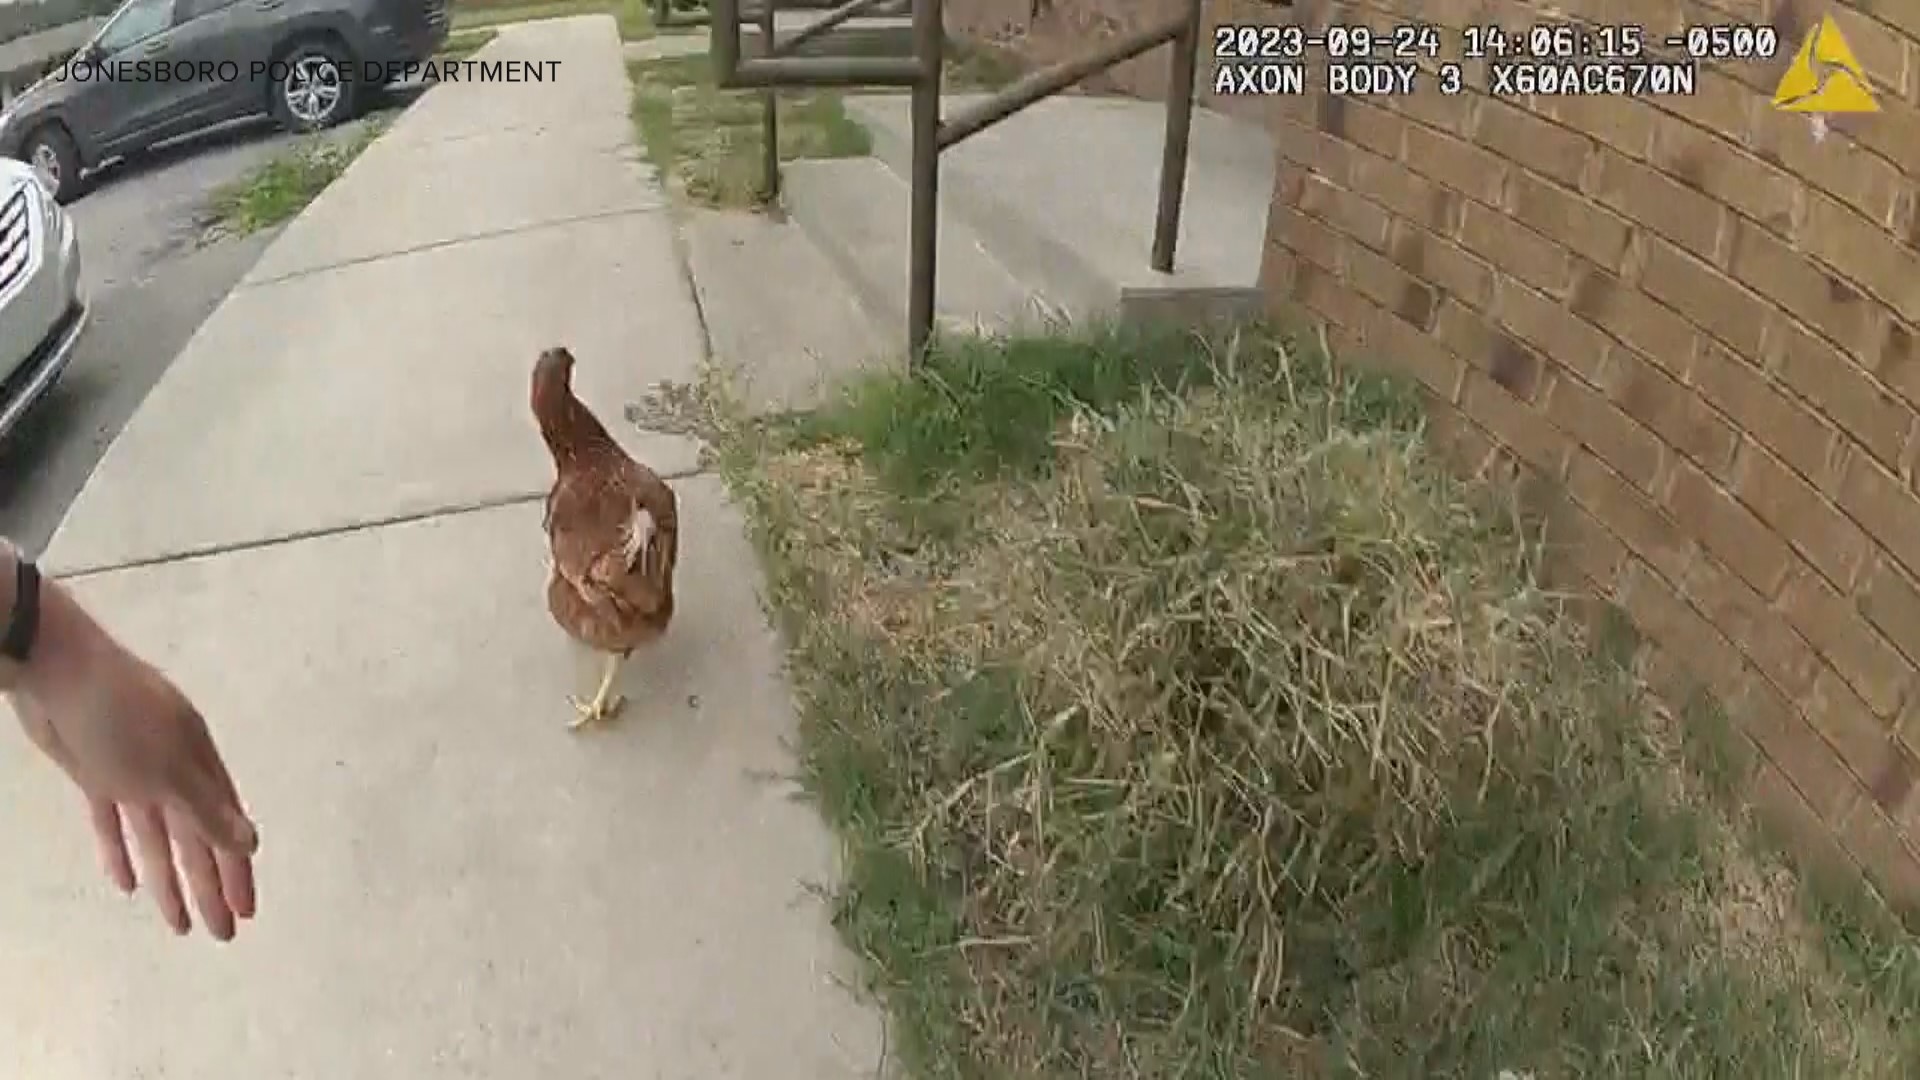 Police apprehend chicken after hilarious chase | kare11.com